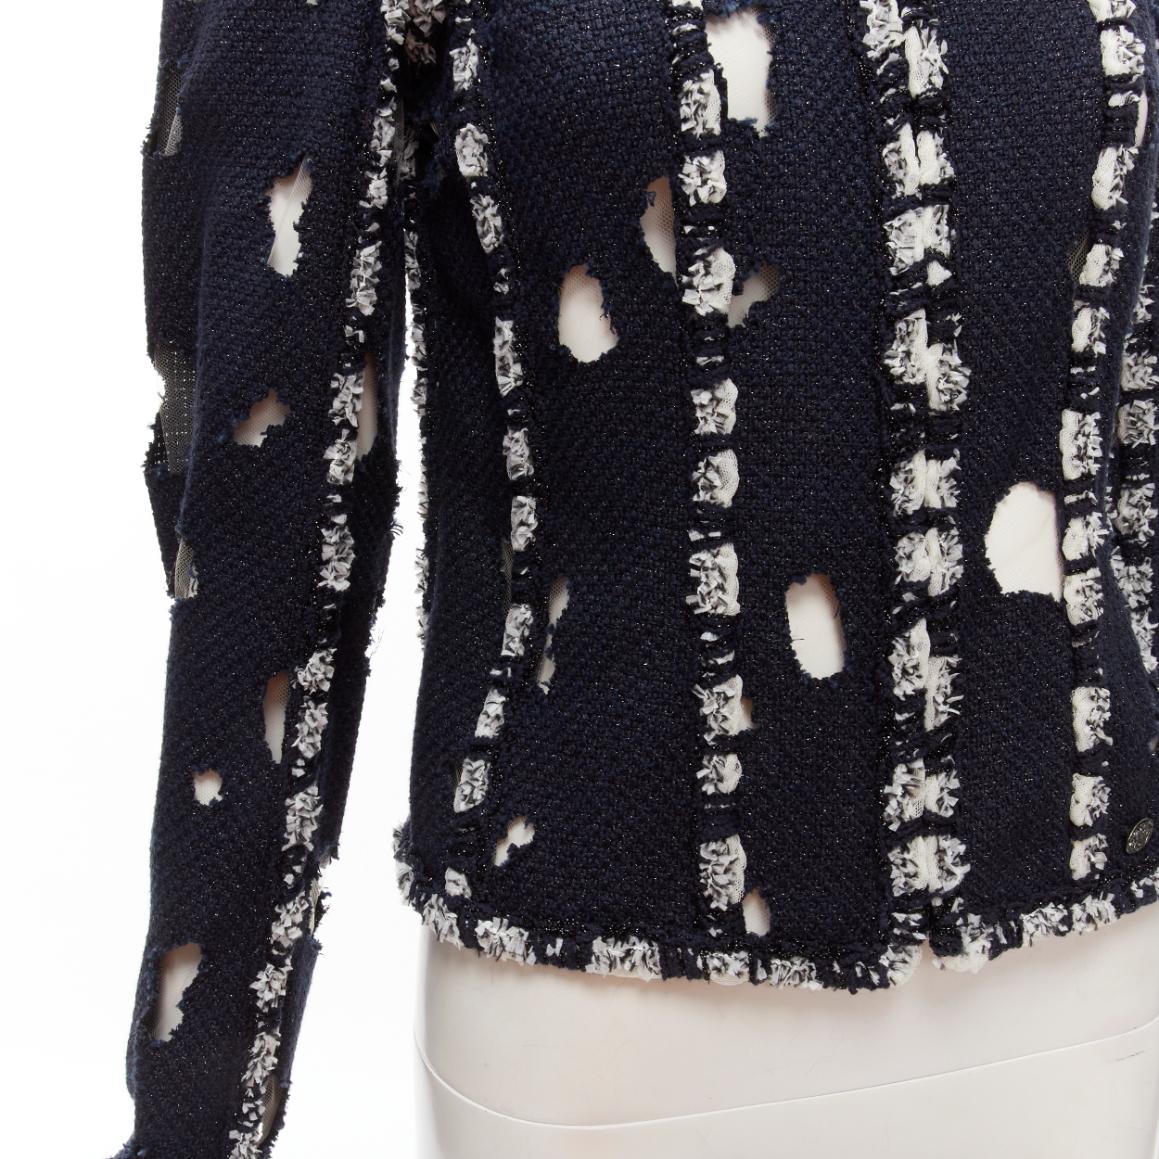 CHANEL Karl Lagerfeld 11P Runway Marienbad punk distressed tweed jacket FR38 M
Reference: TGAS/C01883
Brand: Chanel
Designer: Karl Lagerfeld
Collection: 11P - Runway
Material: Tweed, Polyester
Color: Blue, White
Pattern: Solid
Closure: Zip
Lining: